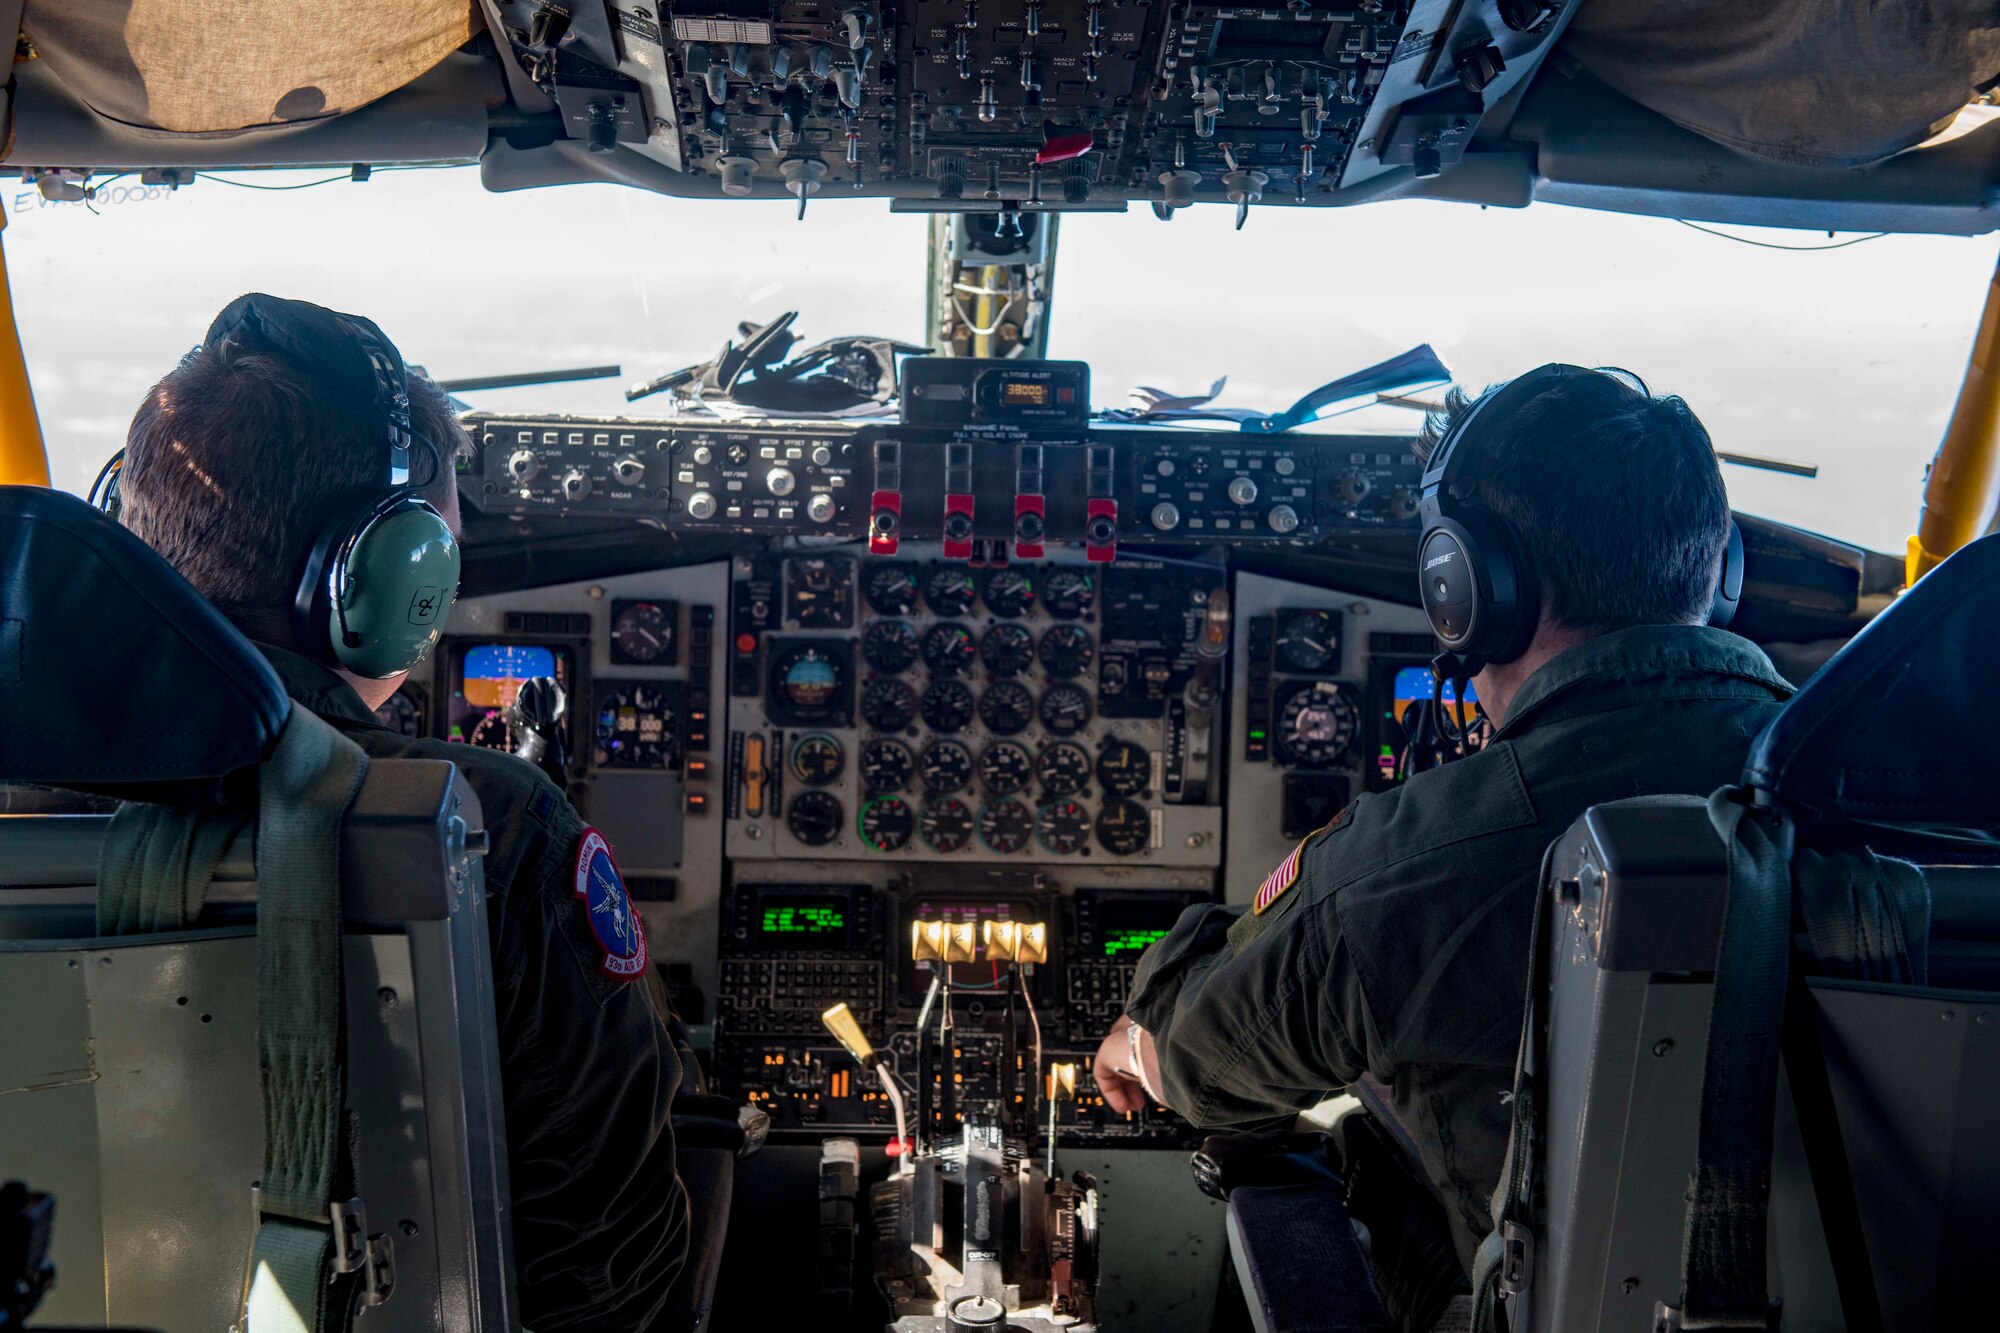 U.S. Air Force 1st Lt. Jake Erickson (left) and Maj. Frank Simon (right), 93rd Air Refueling Squadron KC-135 Stratotanker pilots, operate a KC-135 en route to conduct an aeromedical evacuation in Japan, Nov. 10, 2020. Aeromedical evacuation missions consist of critical care transport teams executing patient movement and care using mobility aircraft such as the C-17 Globemaster III, C-130 Hercules and KC-135. (U.S. Air Force photo by Senior Airman Lawrence Sena)